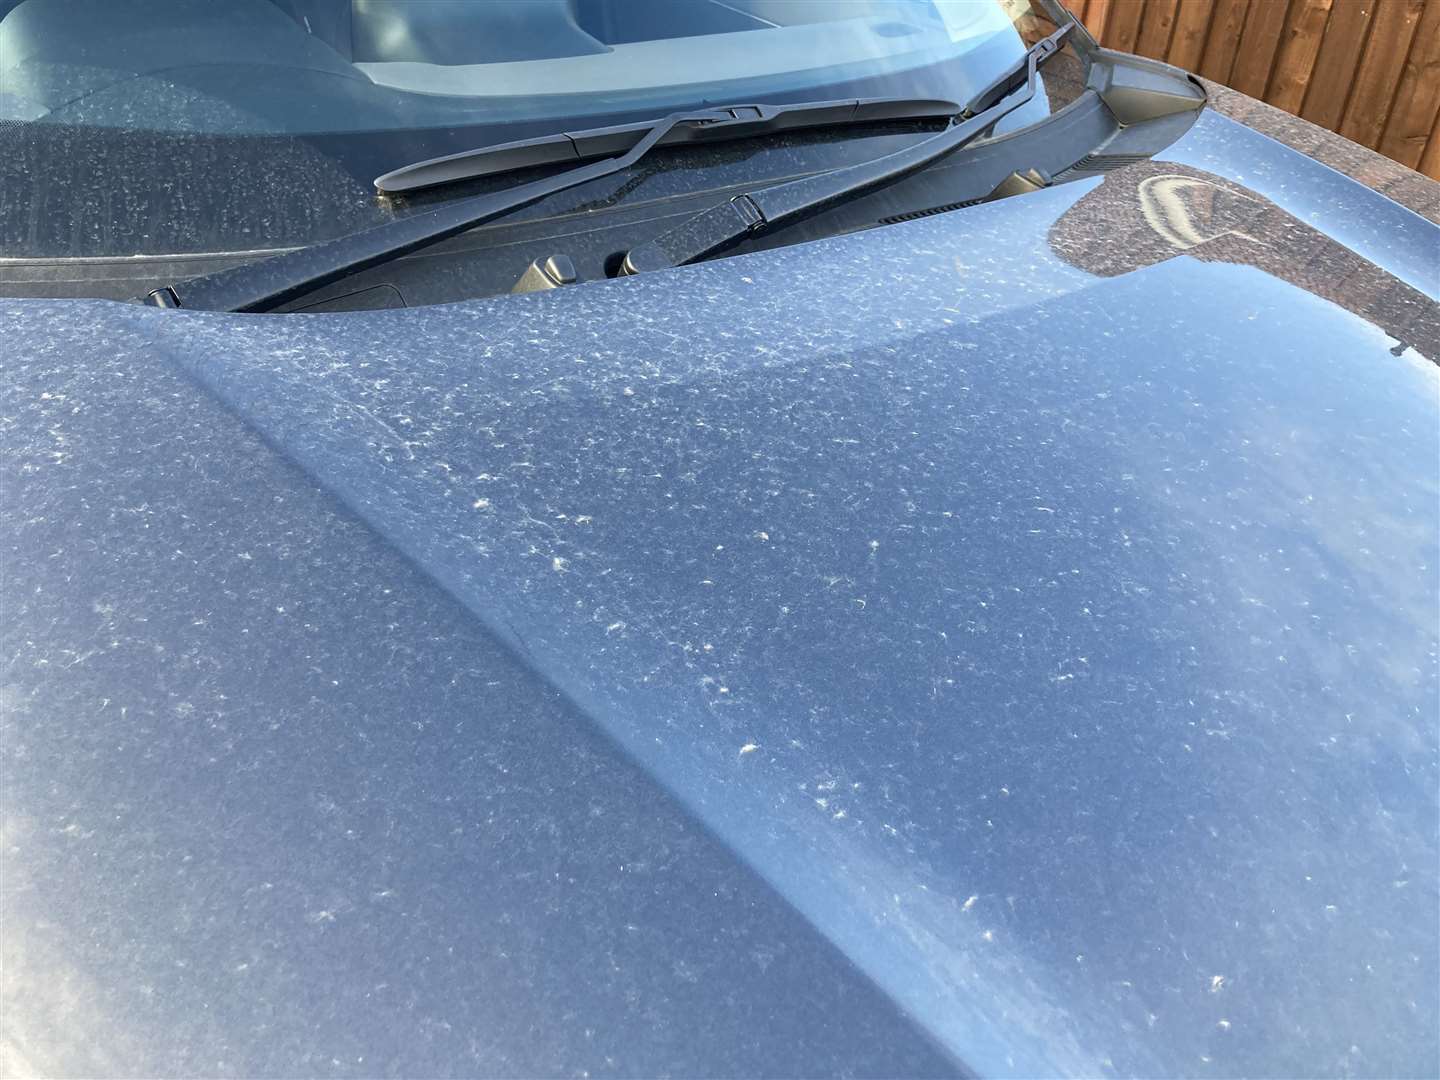 On Friday afternoon dust was covering vehicles in parts of north Kent